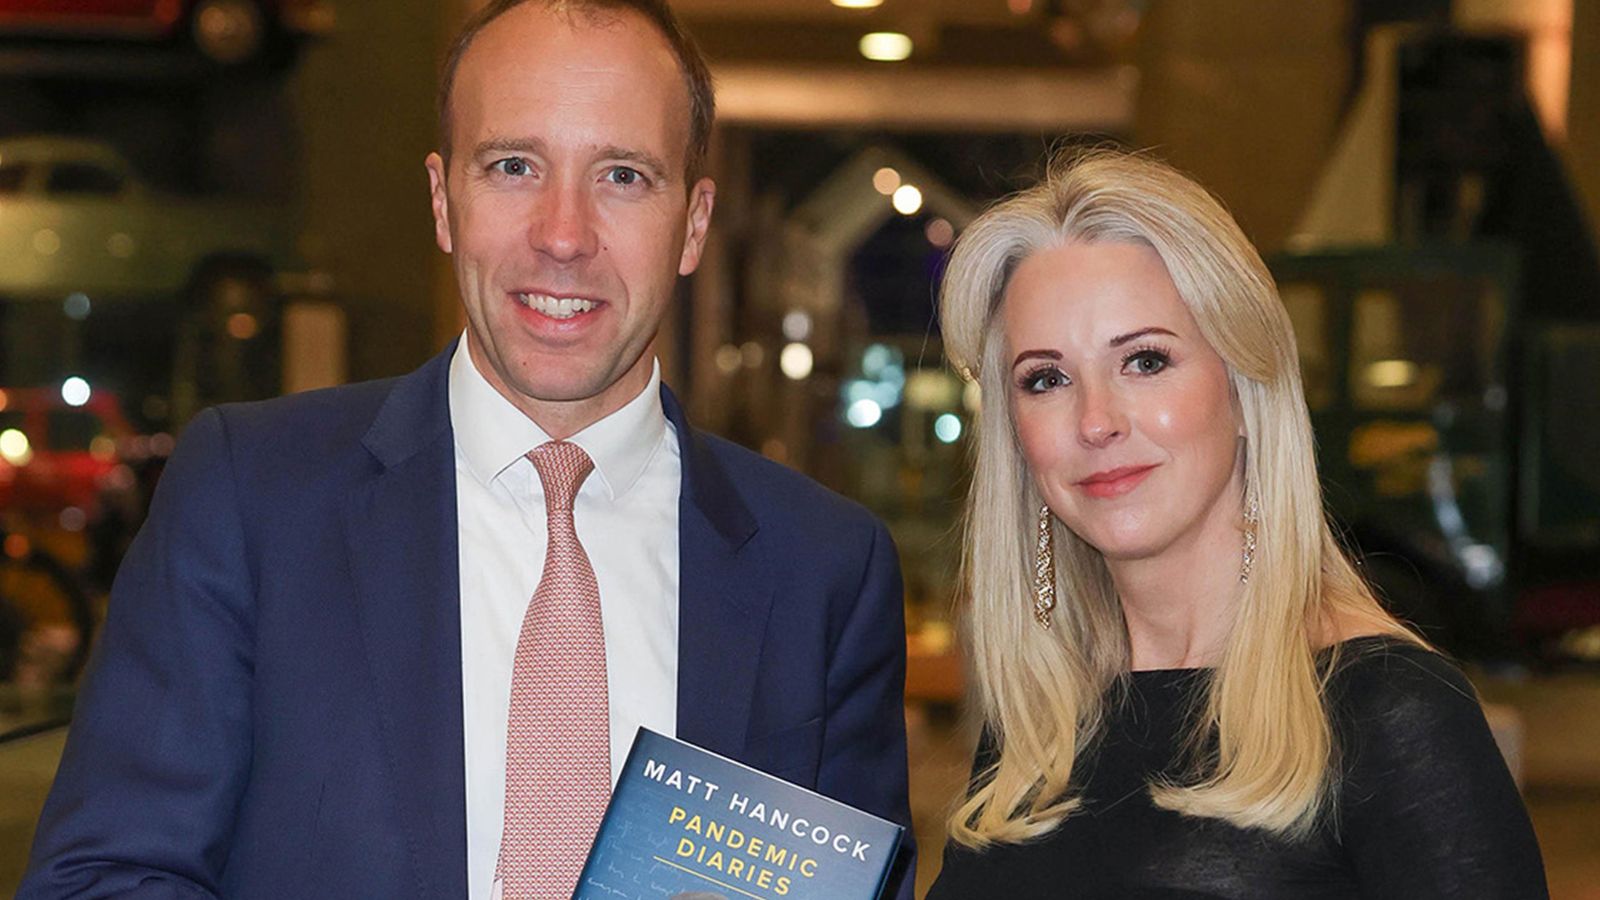 Journalist Isabel Oakeshott says public not interested in Matt Hancock's reputation but want to know the truth about lockdown